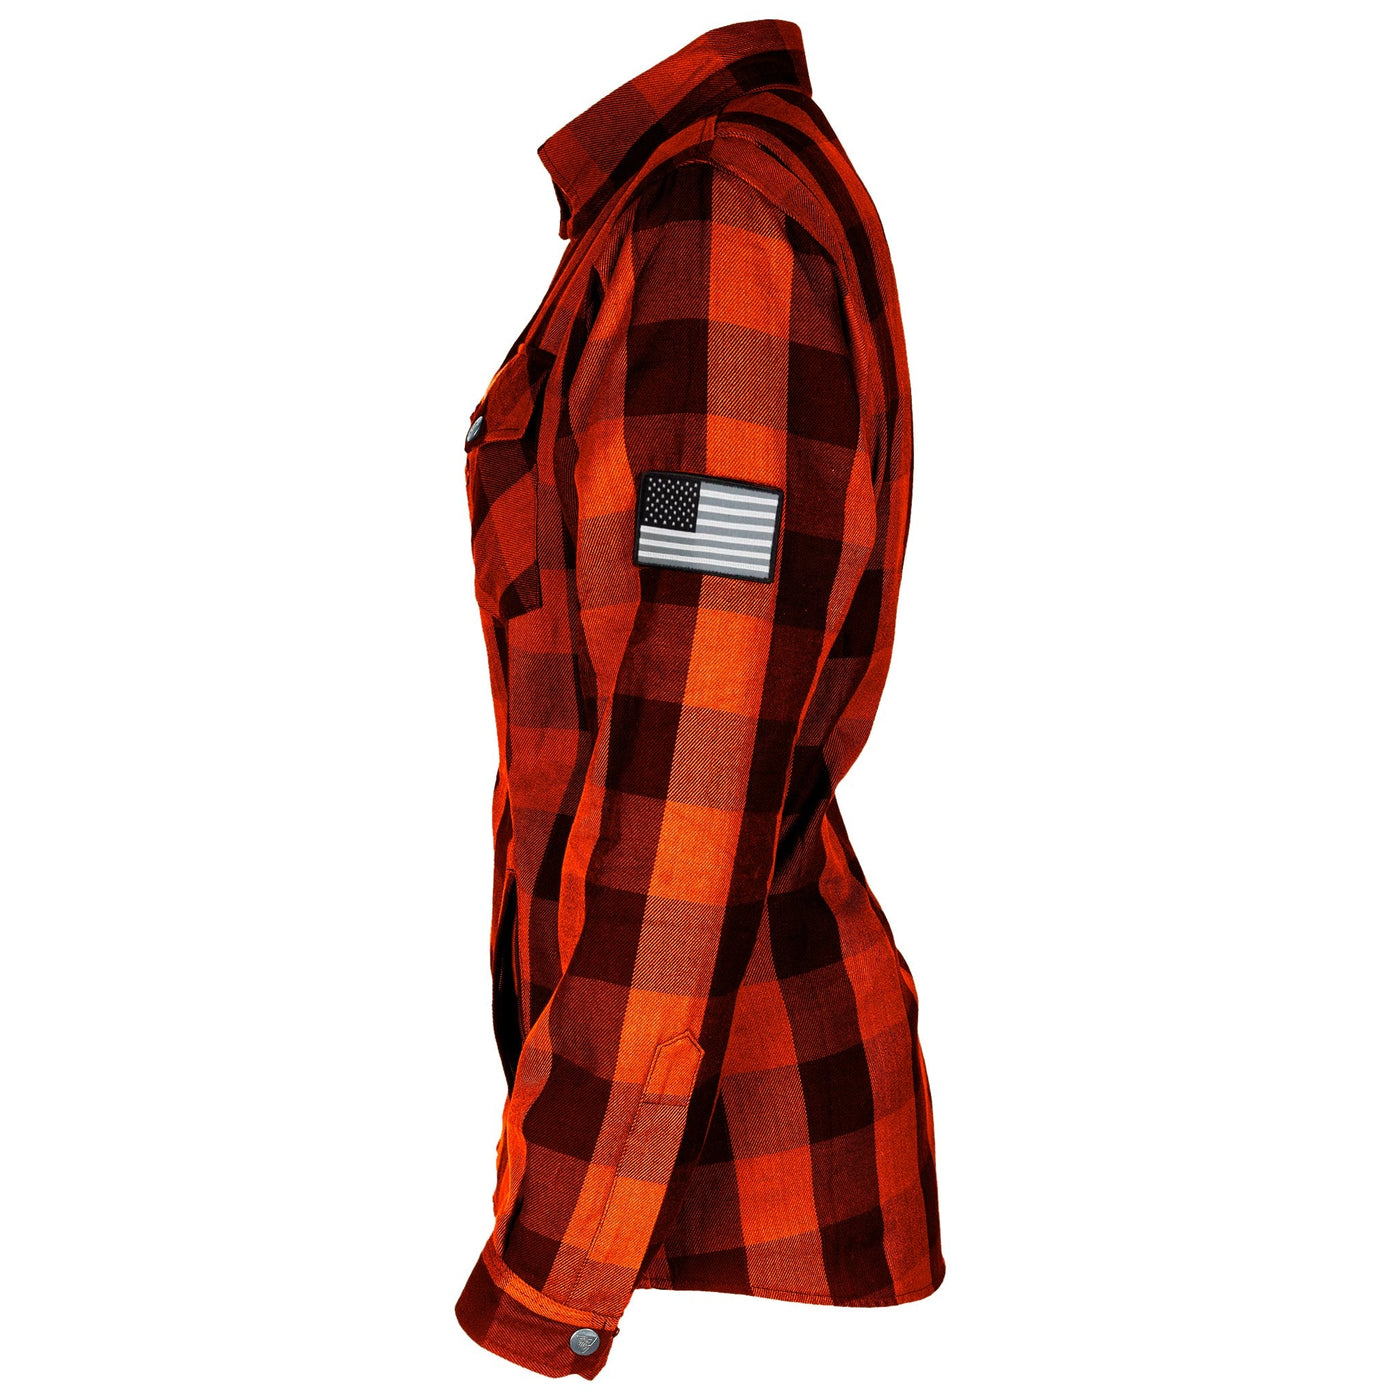 Protective Flannel Shirt with Pads for Women - Orange Checkered